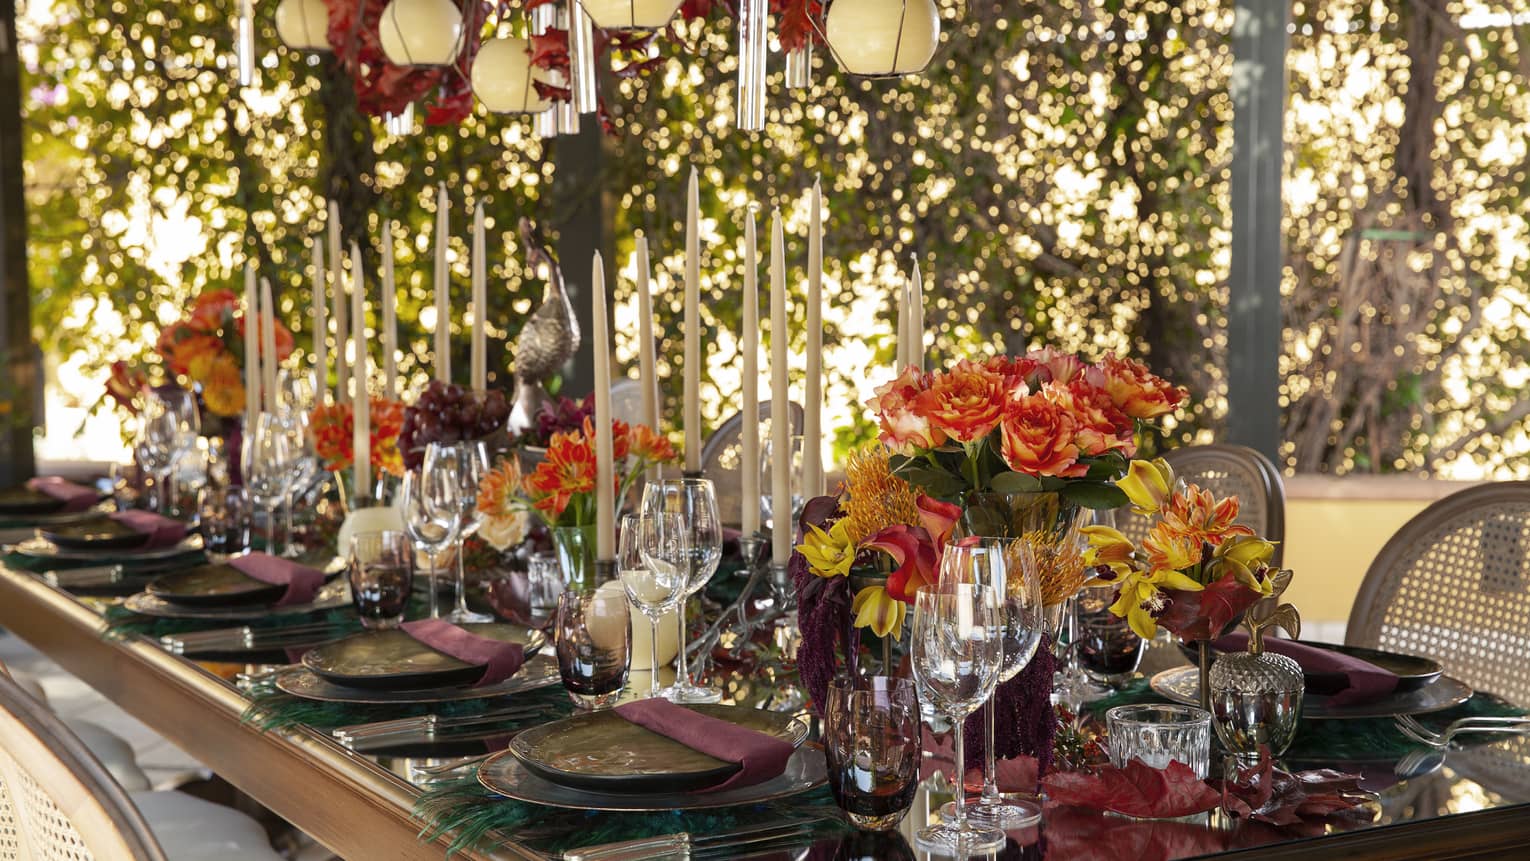 Garden wedding dining table set with long candles, orange red and yellow flowers